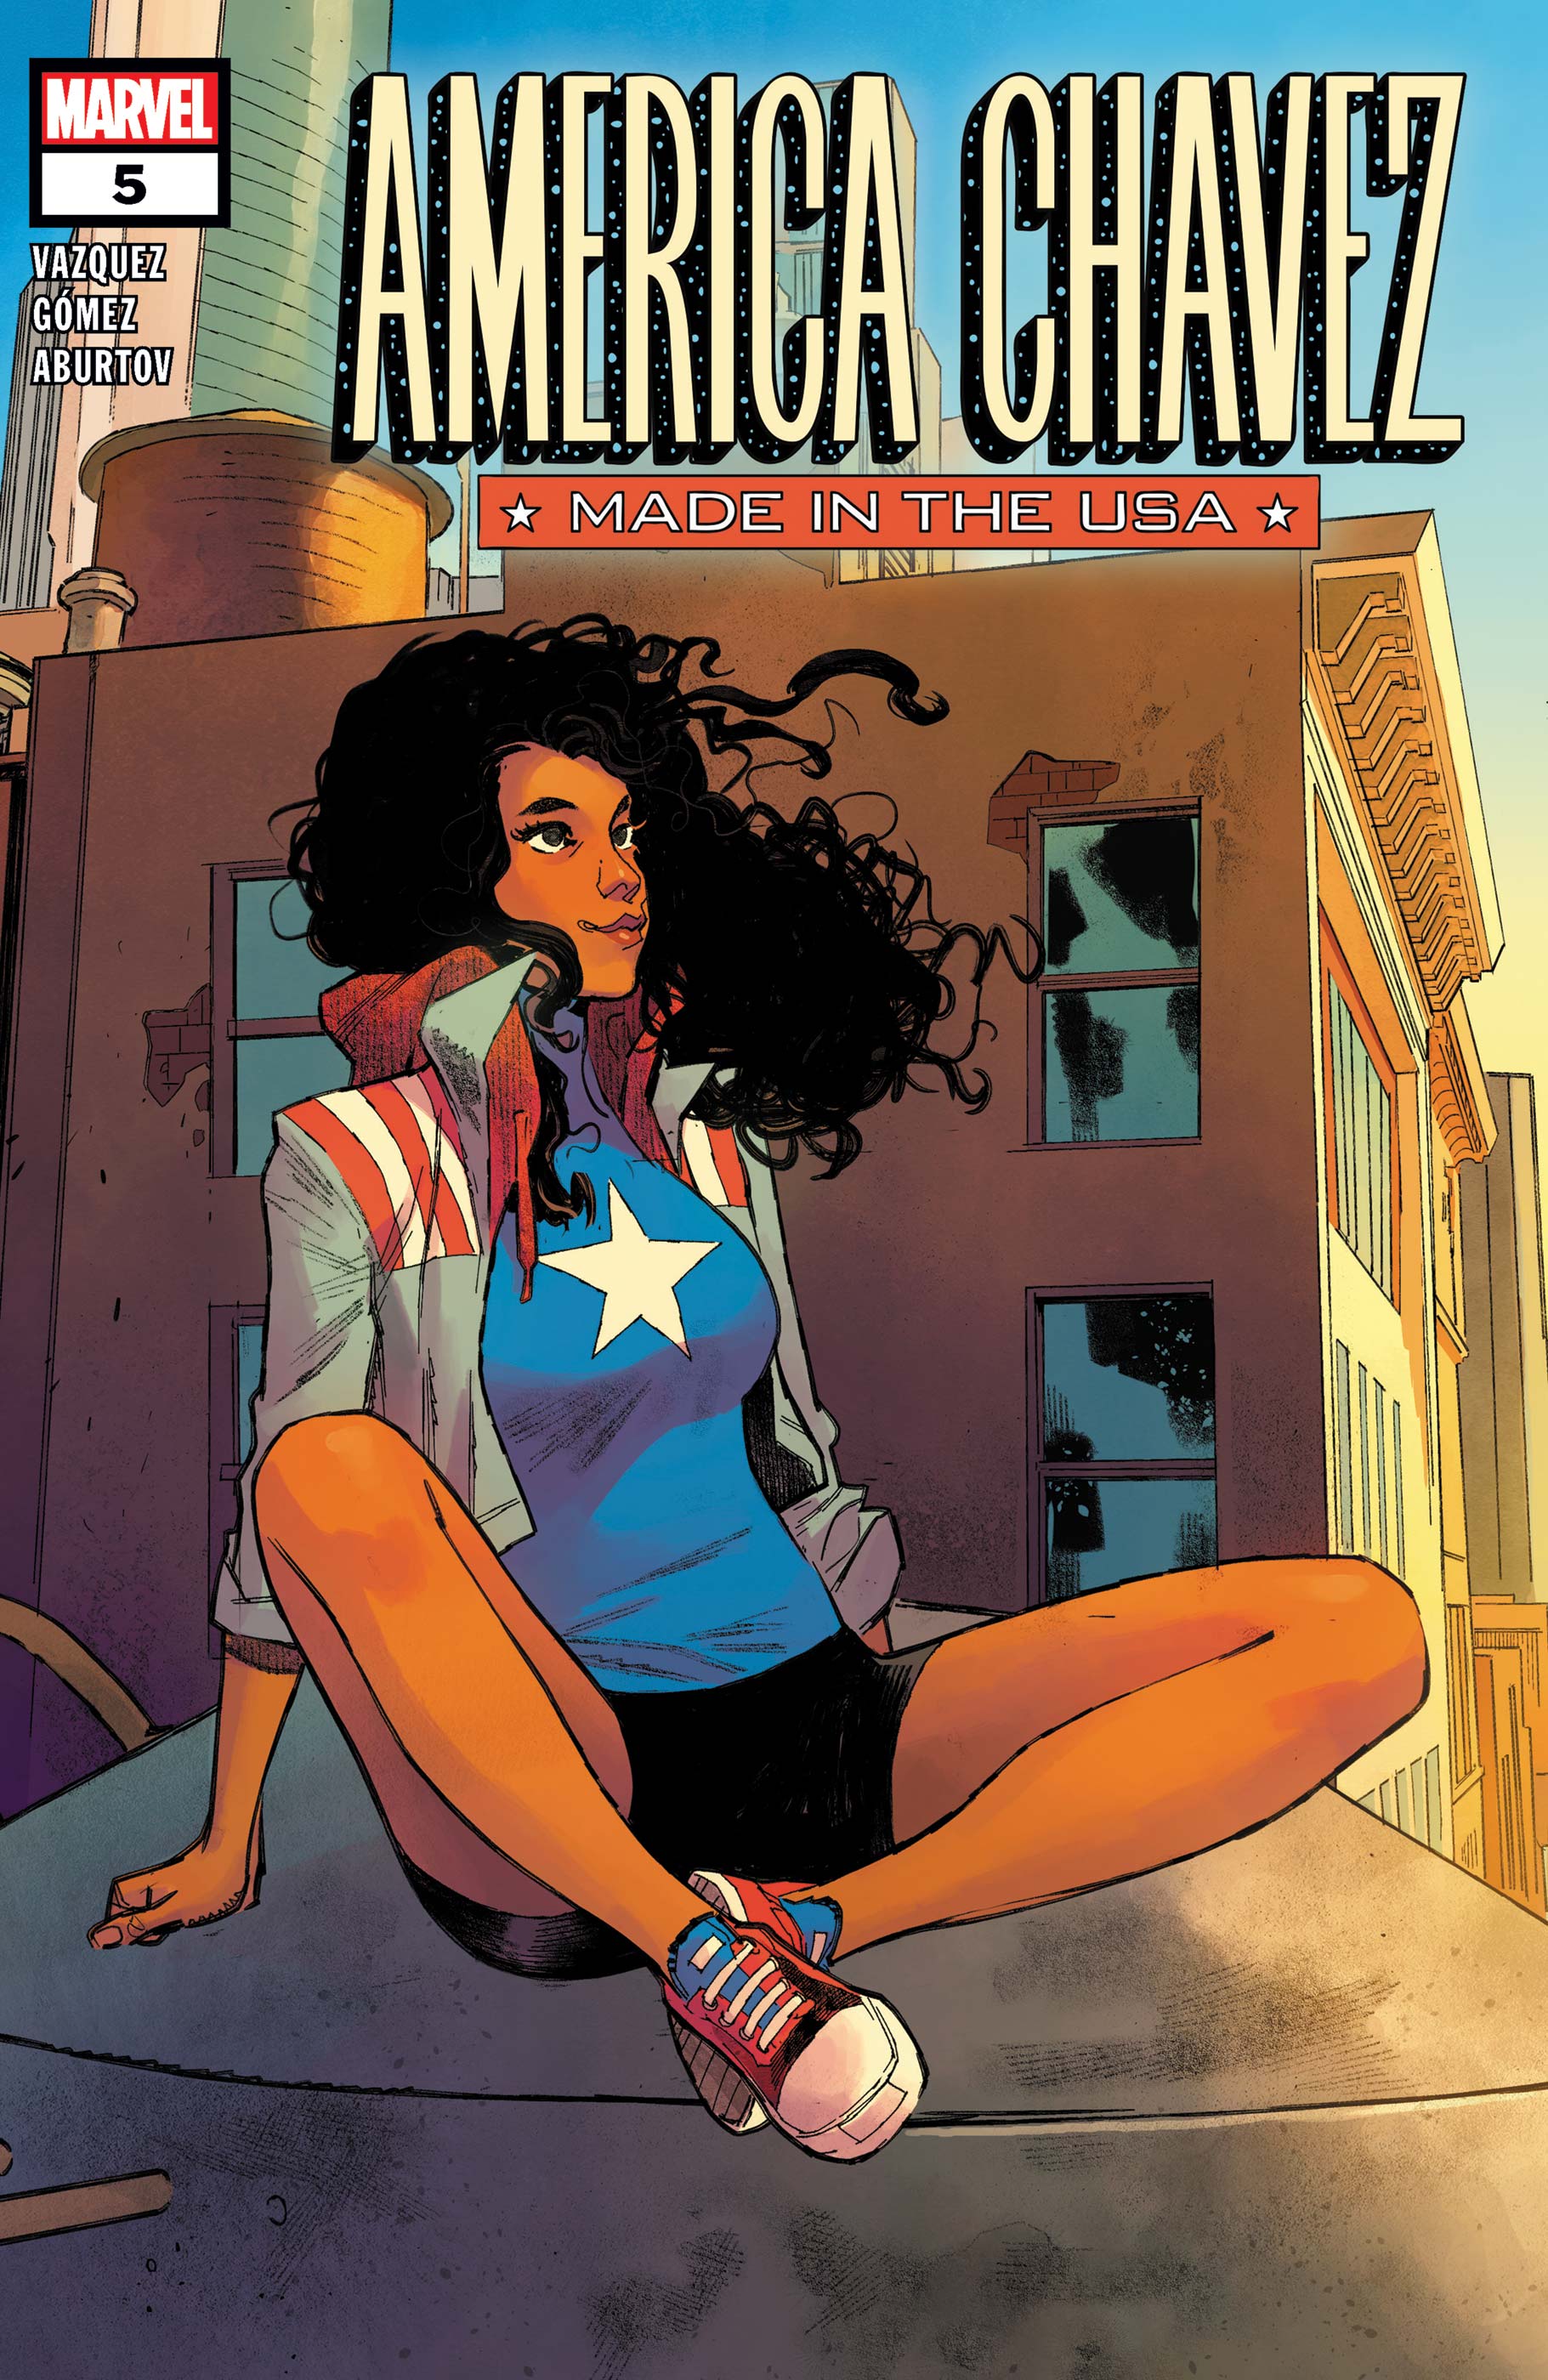 America Chavez: Made in the USA (2021) #5